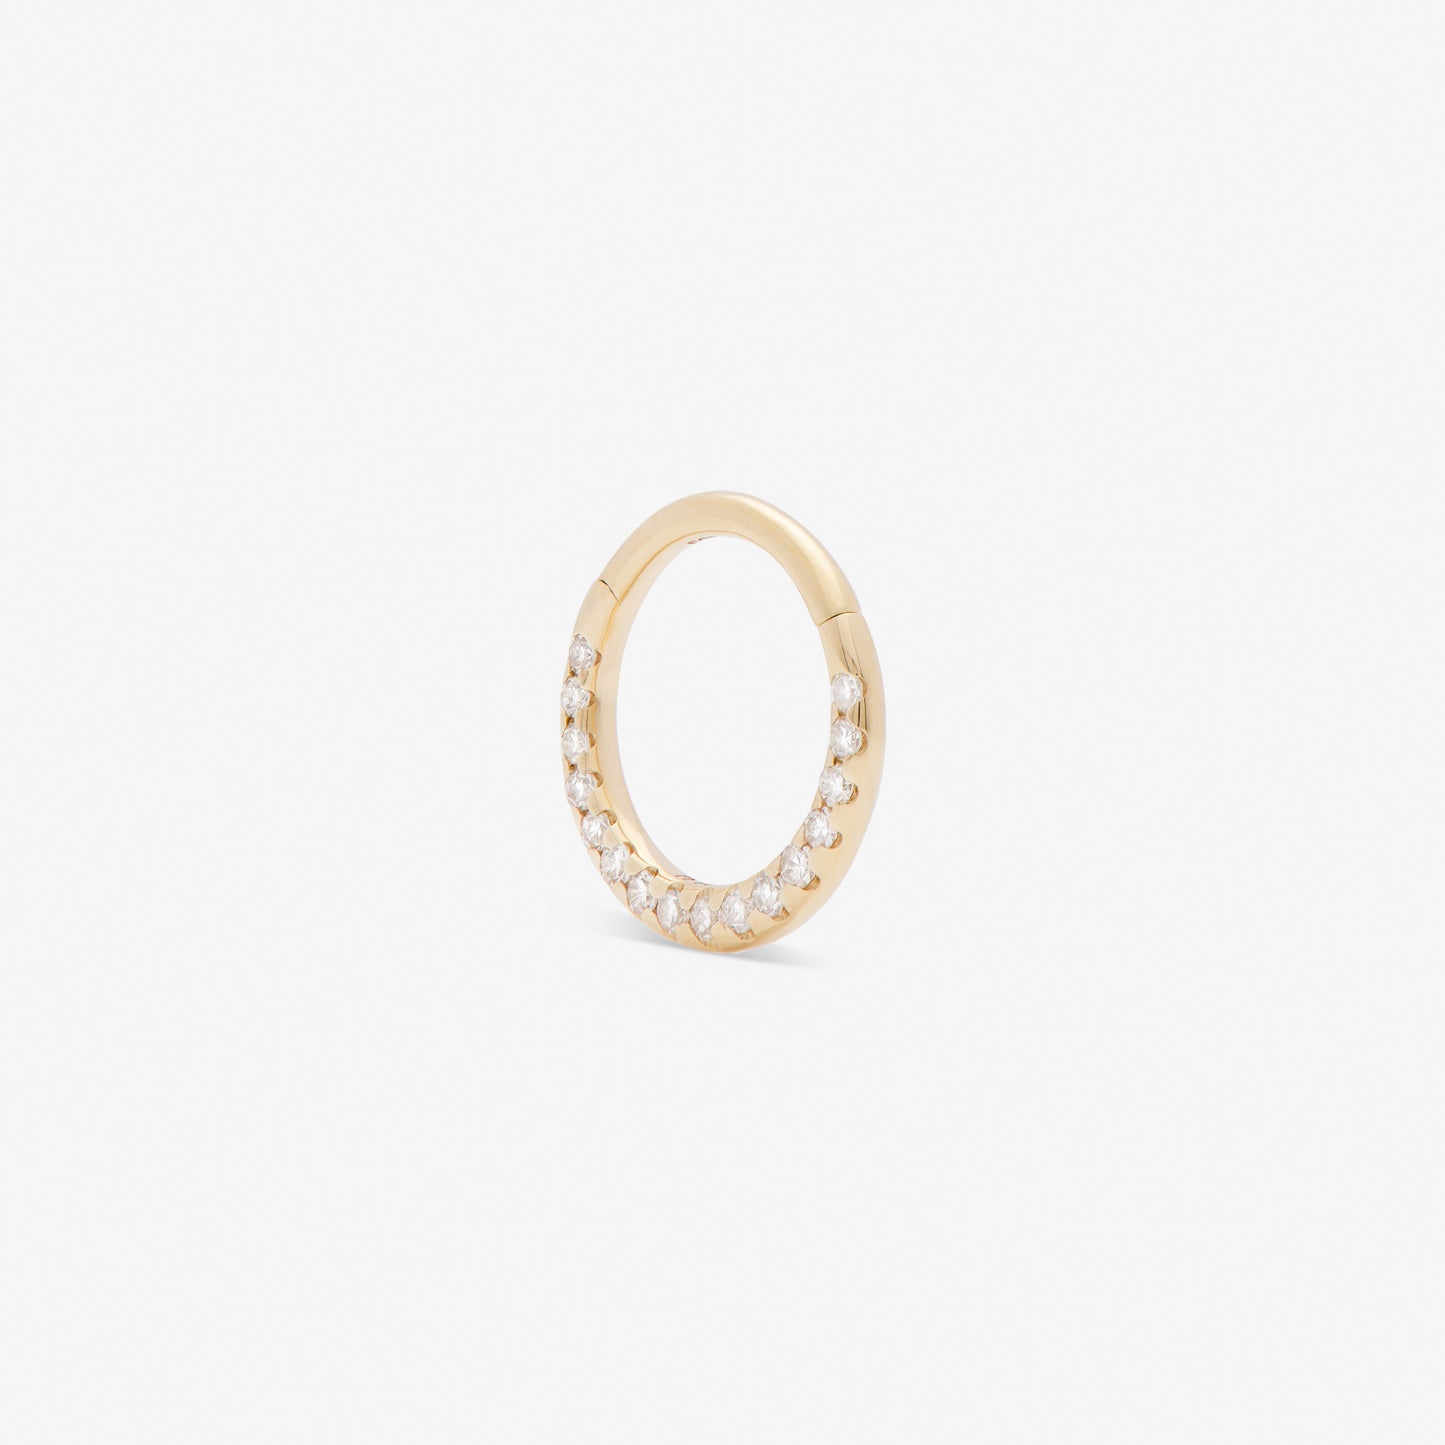 septum huggie with white diamonds set in yellow gold from side